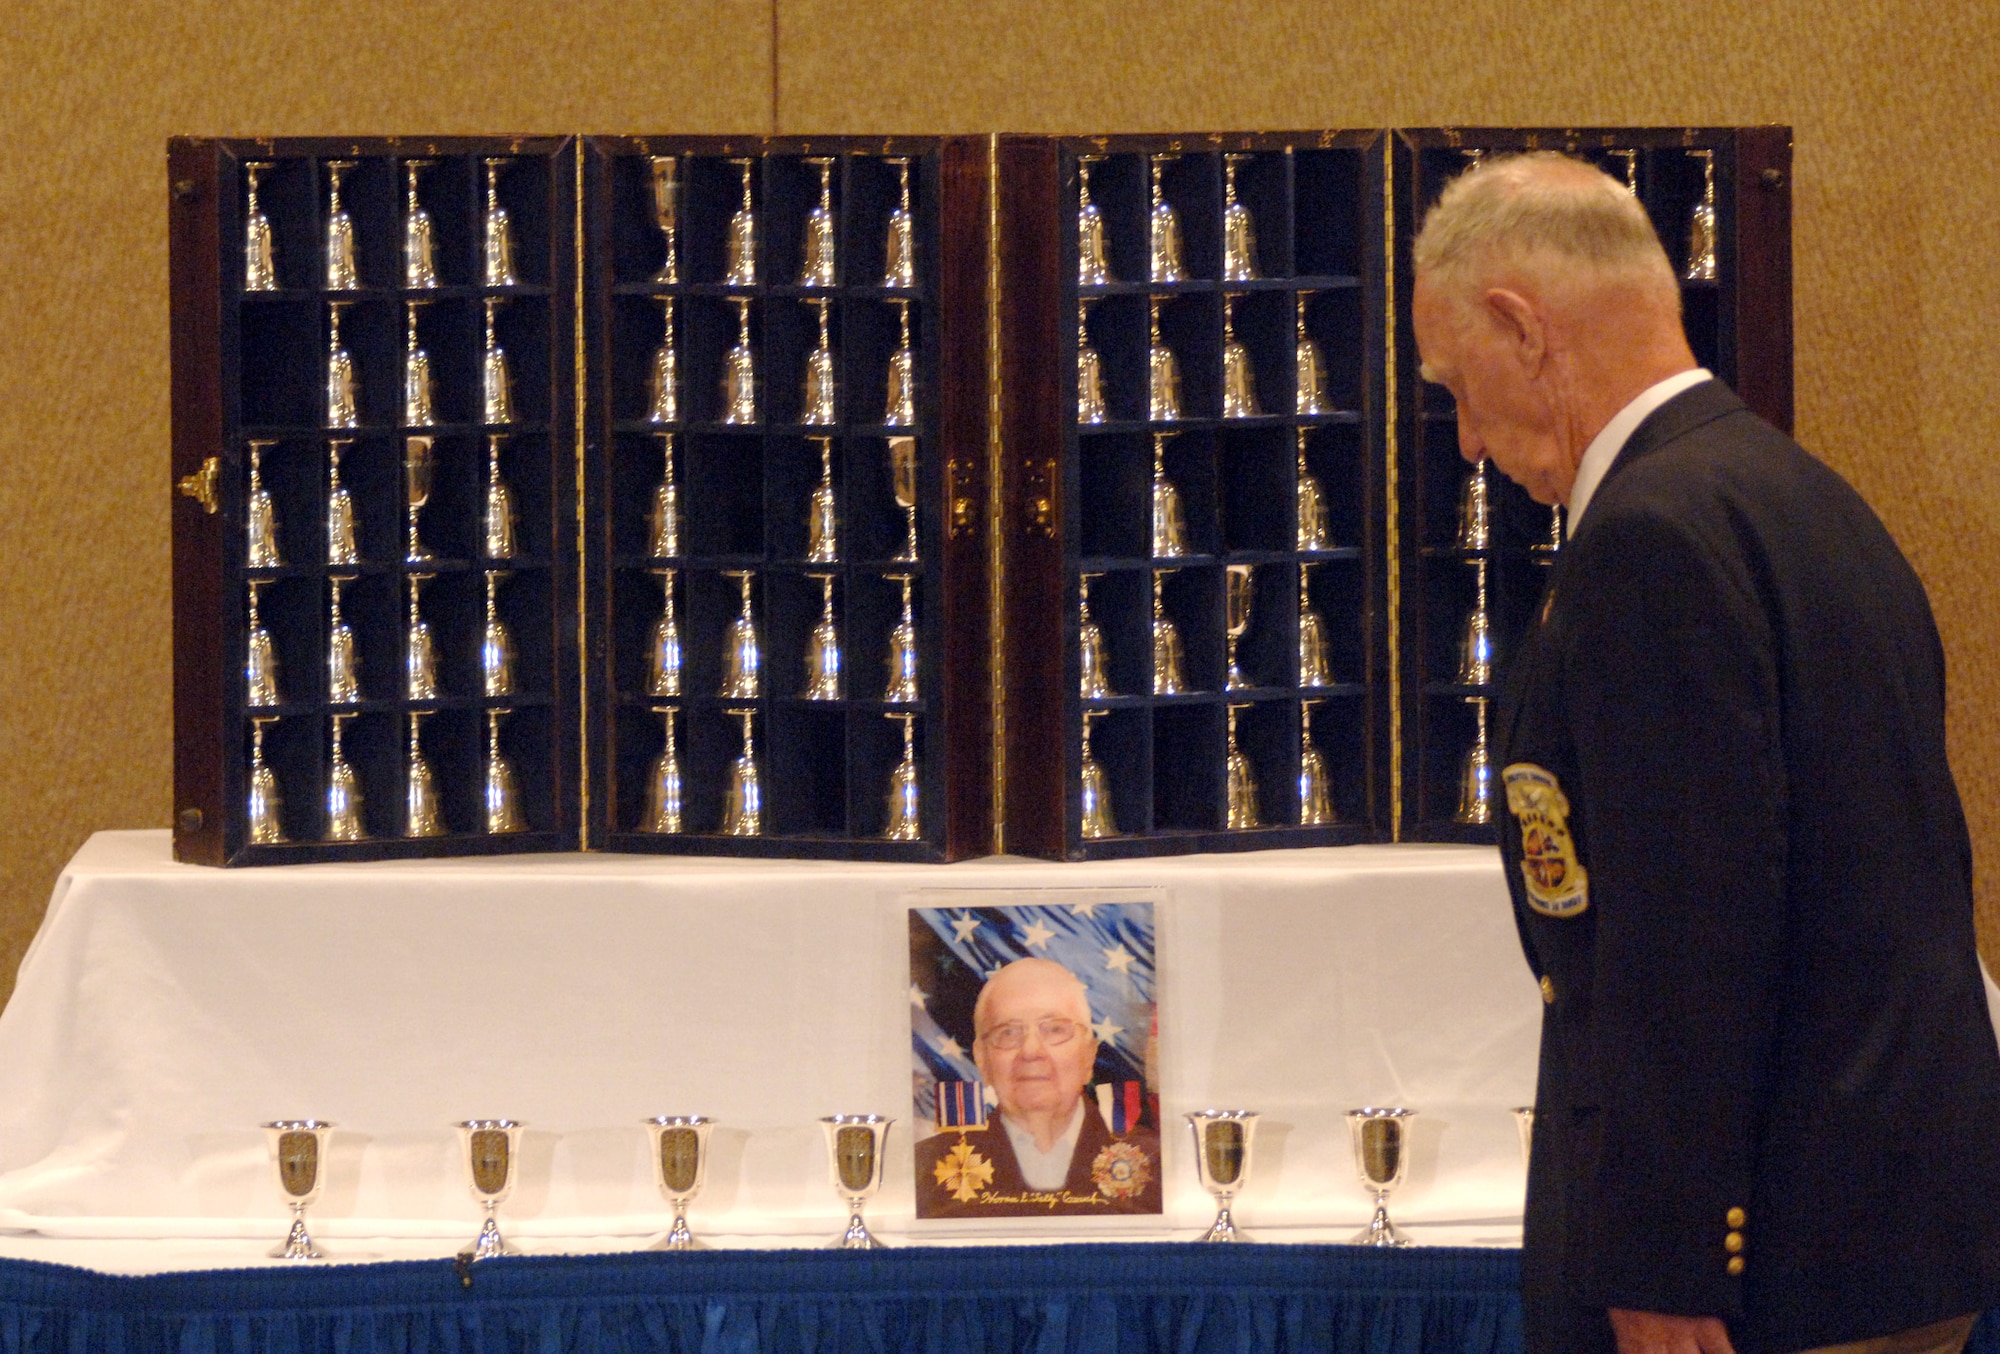 Retired Master Sgt. Ed Horton honors the memory of retired Lt. Col. Horrace Crouch by turning his goblet upside down at the goblet ceremony during the 64th Doolittle Raider reunion in Dayton, Ohio, on Tuesday, April 18, 2006. The goblet ceremony is held to honor the Raiders who died since their last meeting. This year, they honored Colonel Crouch, who passed away Dec. 21 from pneumonia. (U.S. Air Force photo/Tech. Sgt. Cecilio M. Ricardo Jr.)